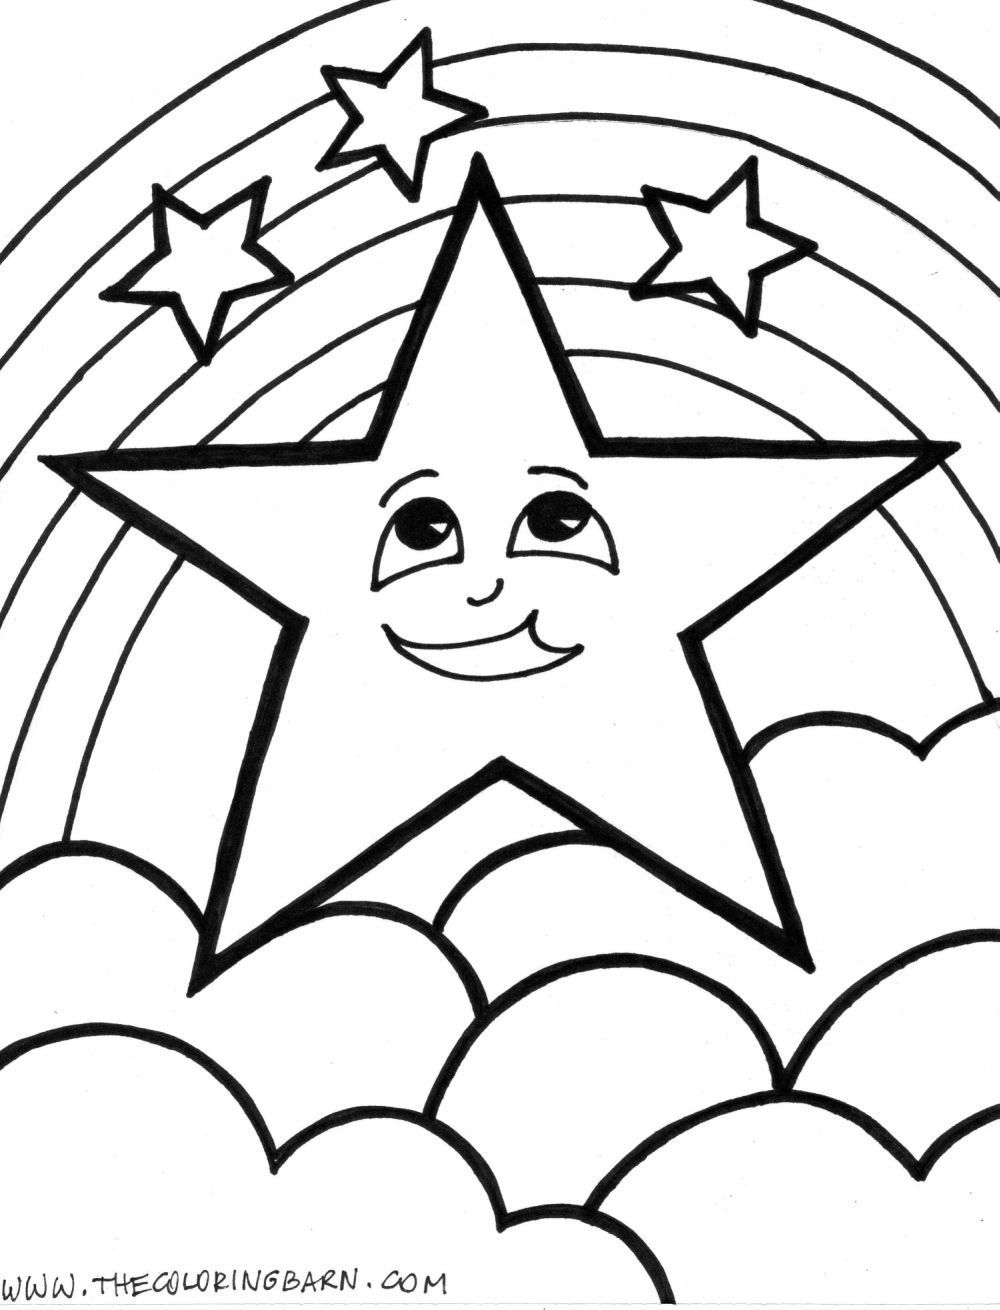 Twinkle Twinkle Little Star Coloring Page - Coloring Pages for ...